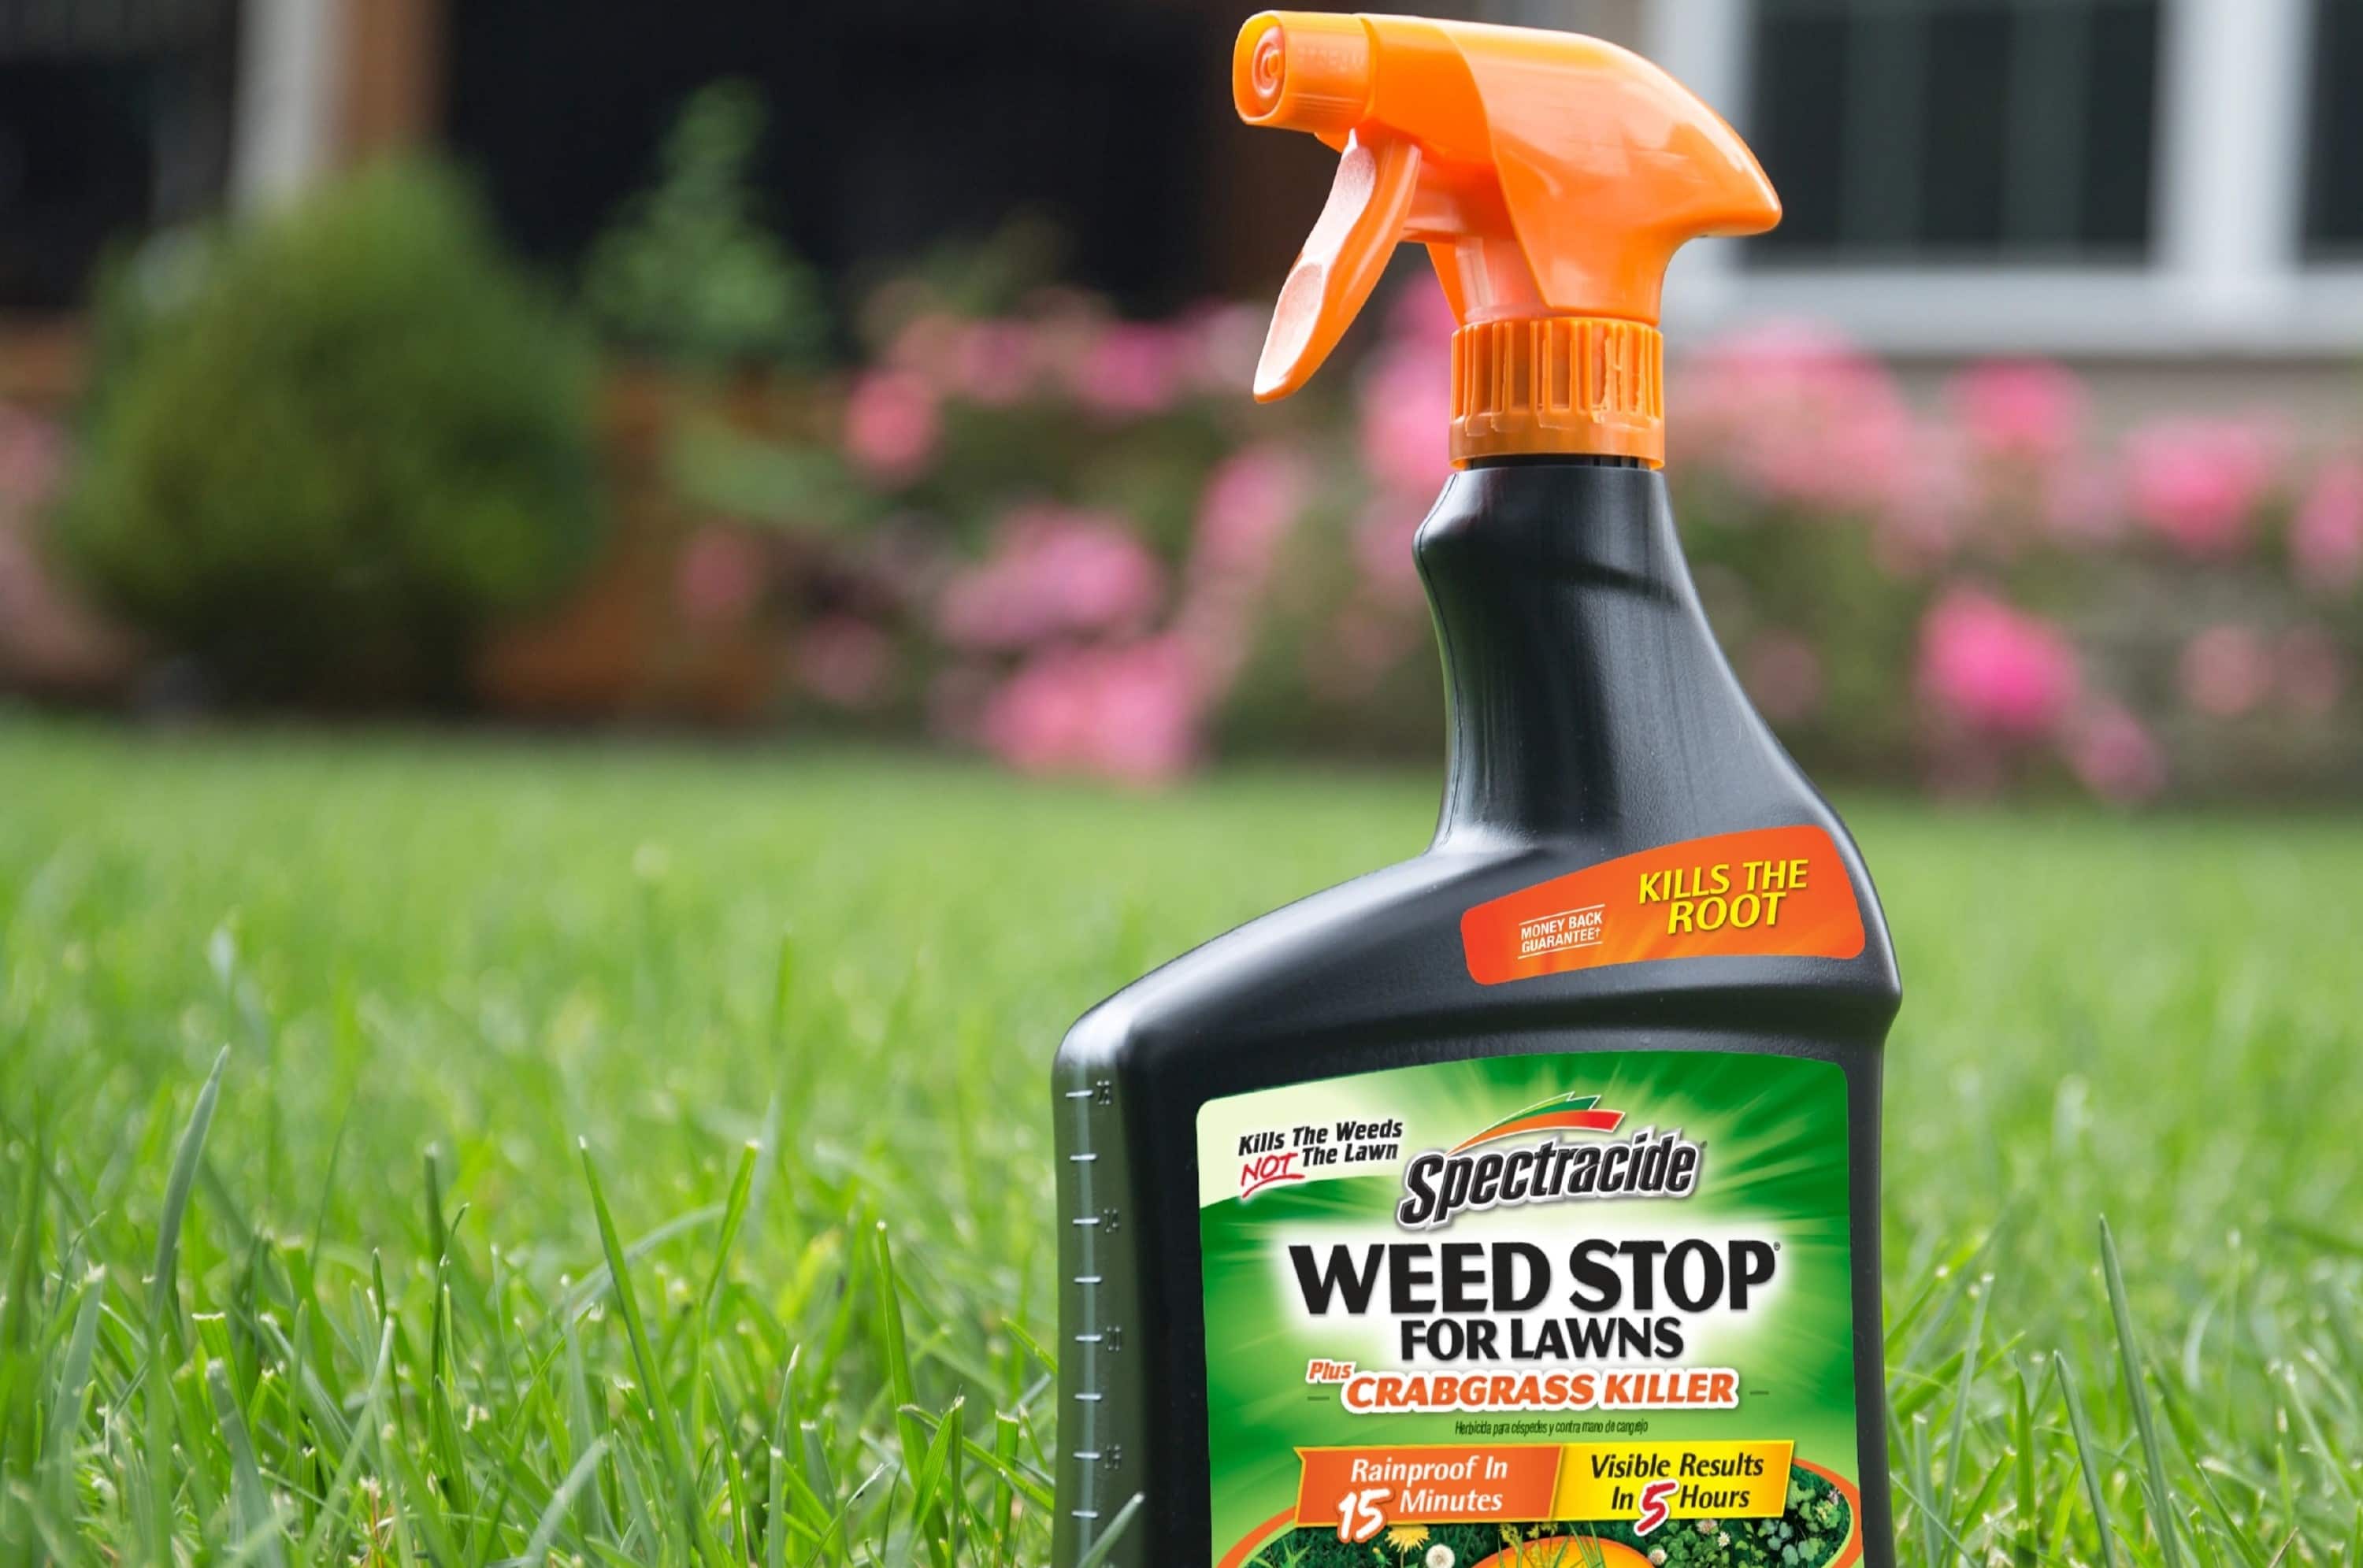 11 Best Spectracide Weed Stop For Lawns Plus Crabgrass Killer For 2023